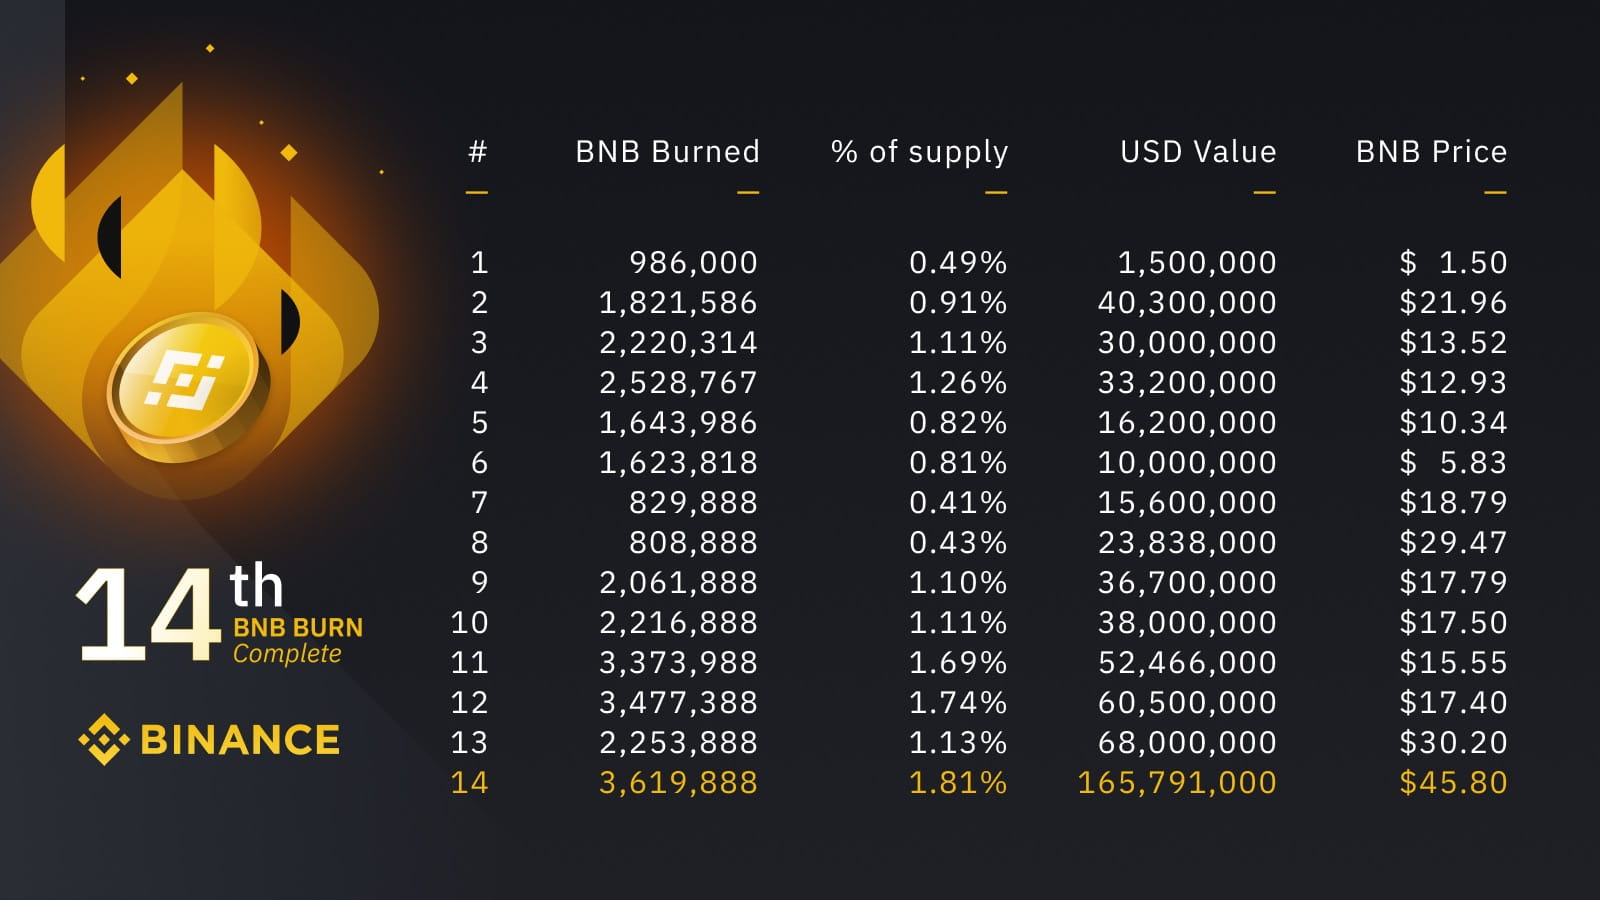 BNB Burn Schedule: Next Binance Coin Burn Date, How Much BNB Will Be Burned, And What Does It Mean?